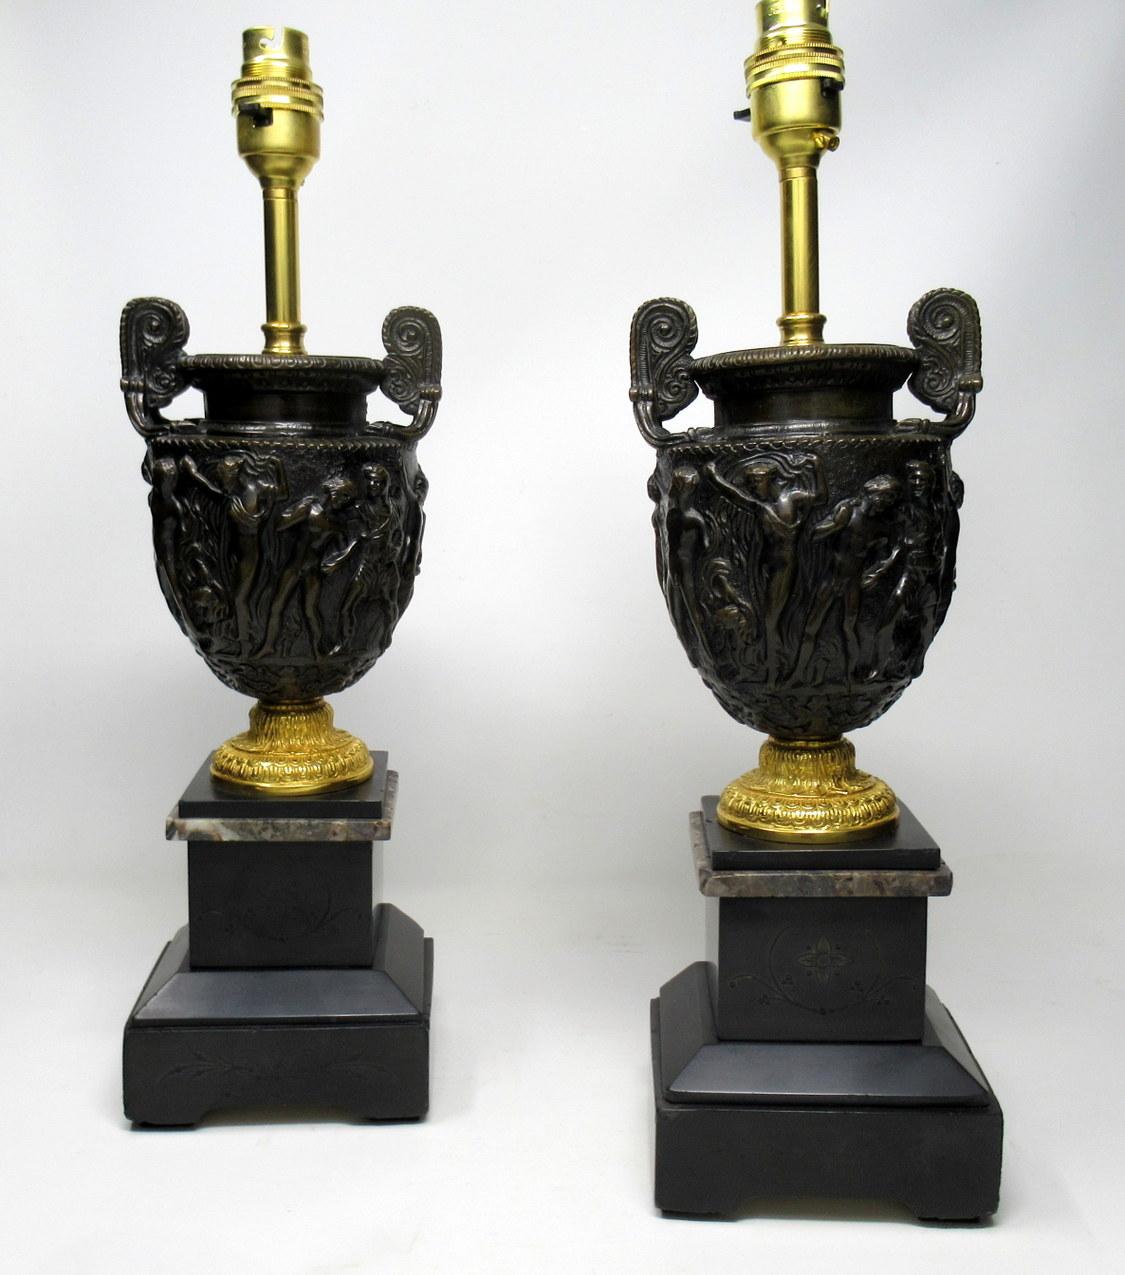 Stunning pair of solid bronze electric table lamps of good size proportions, the main central support is a model of the Townley vase cast in relief ending on an ornate ormolu spreading socle, terminating on a square black and grey marble stepped